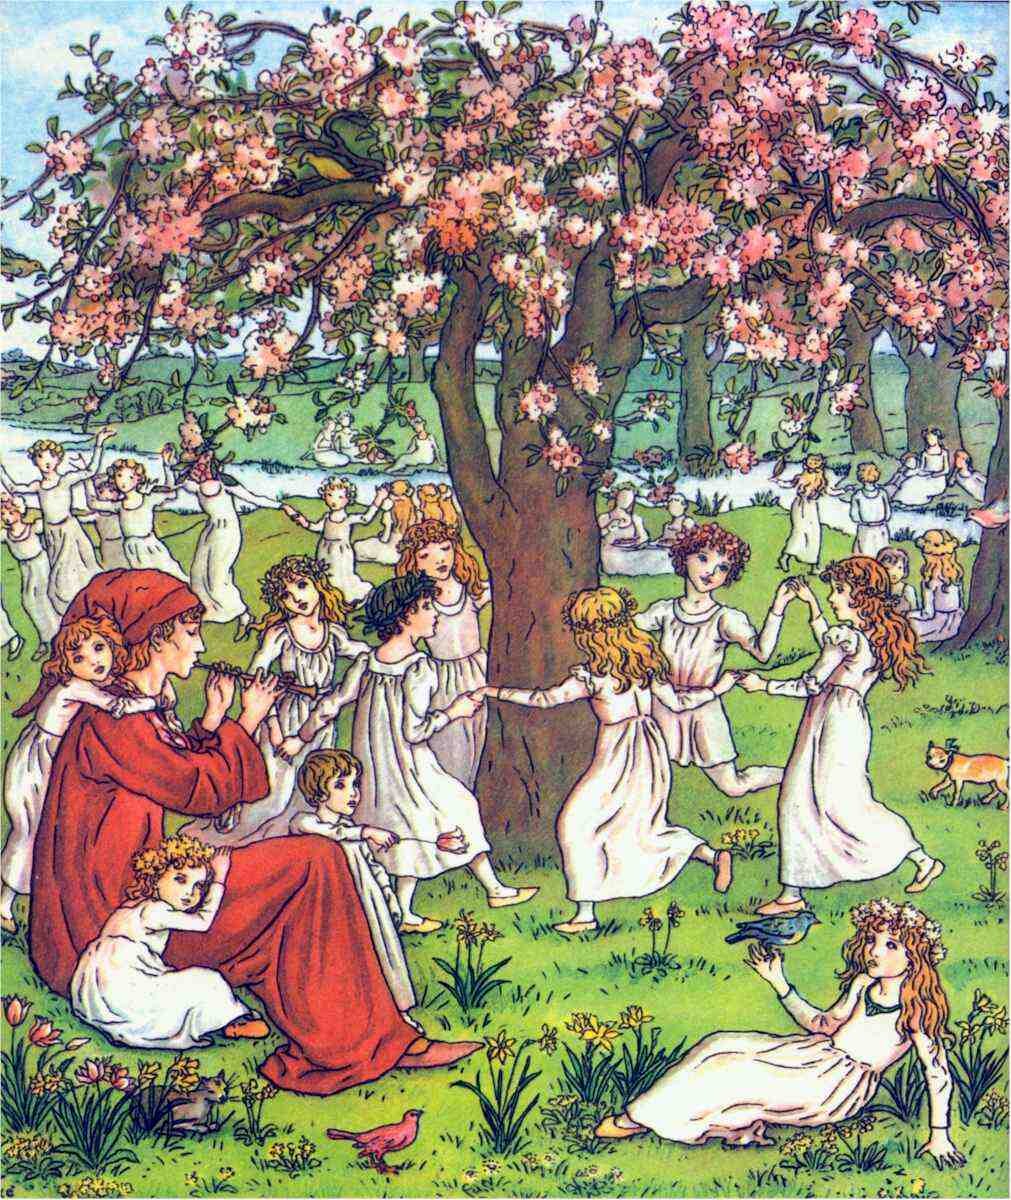  Illustration by Kate Greenaway for  Robert Browning’s poem,  The Pied Piper of Hamelin   